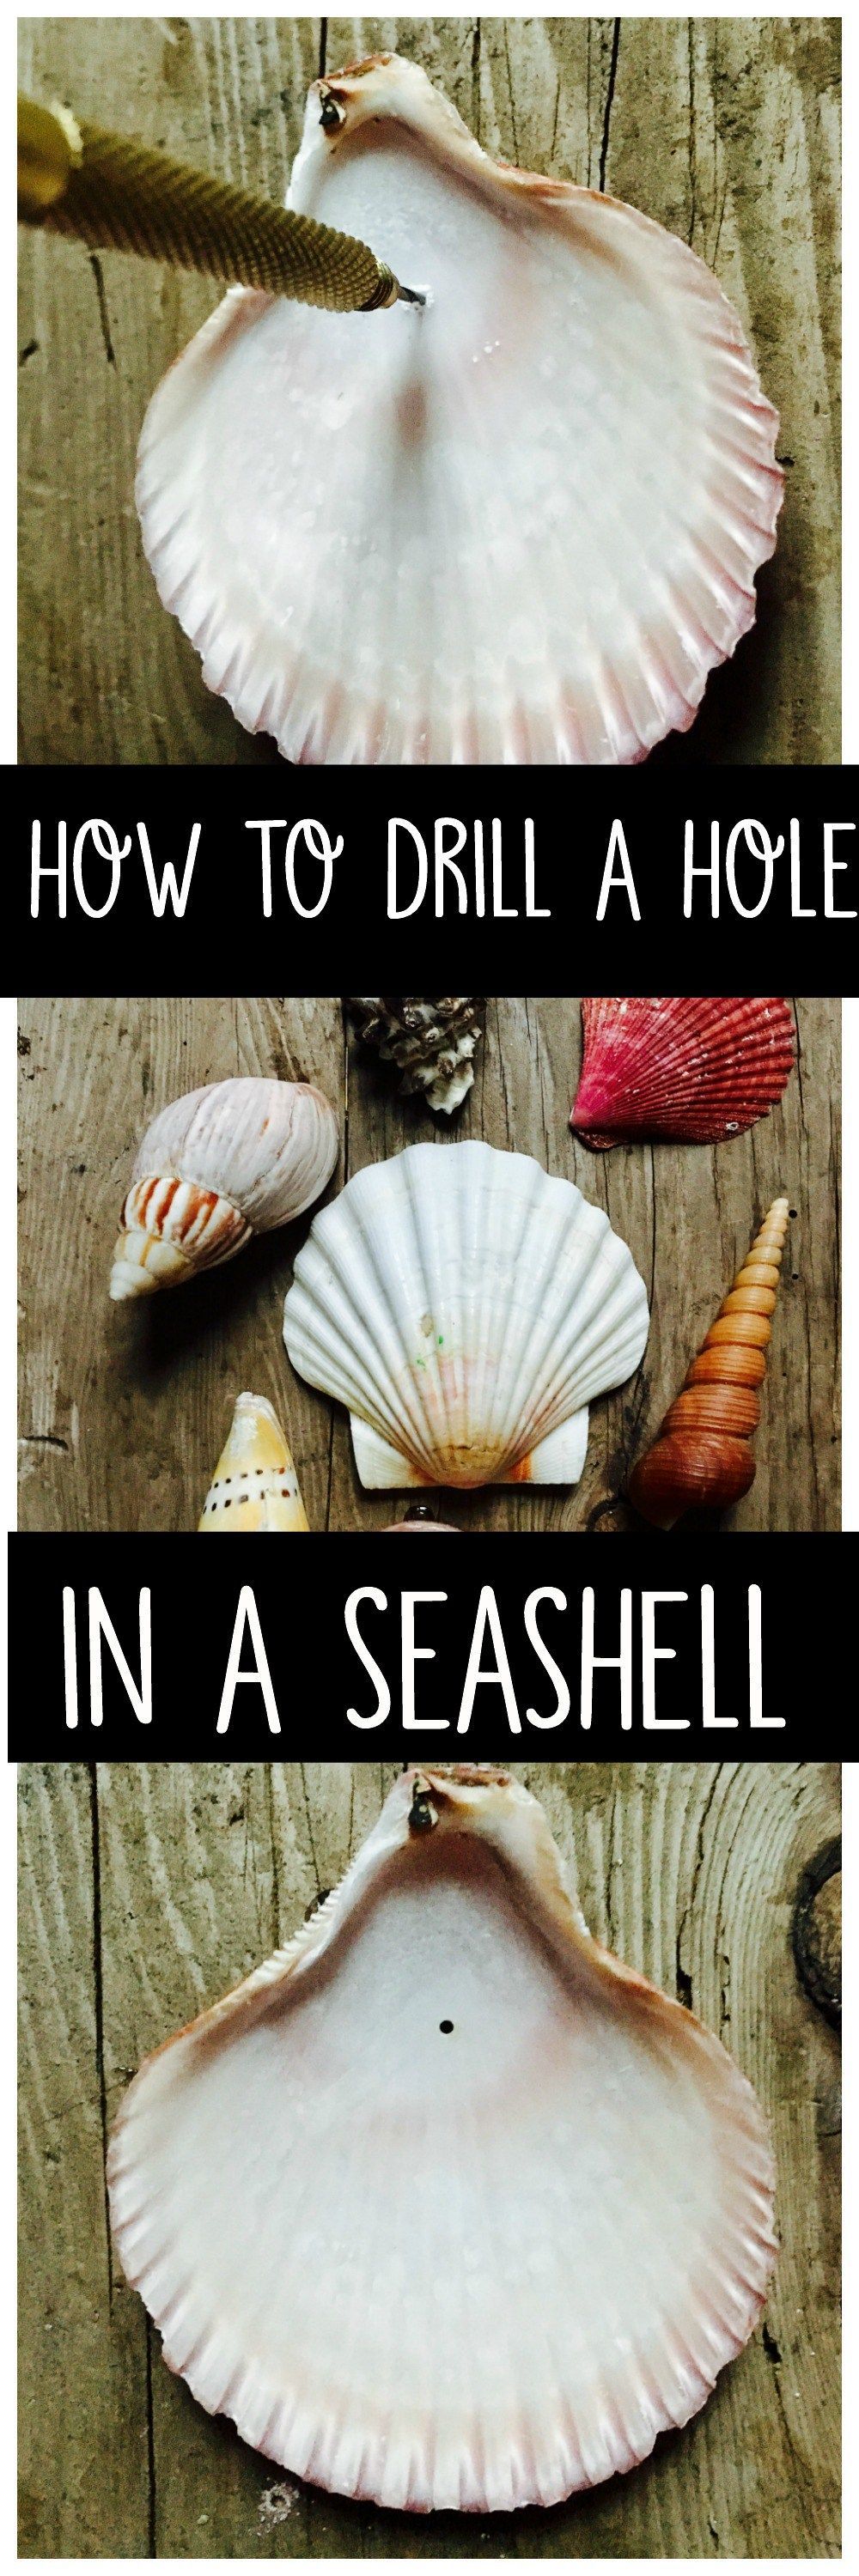 Learn how to drill a hole in a seashell with a simple tool you can purchase from the craft or hardware store. Make crafts or